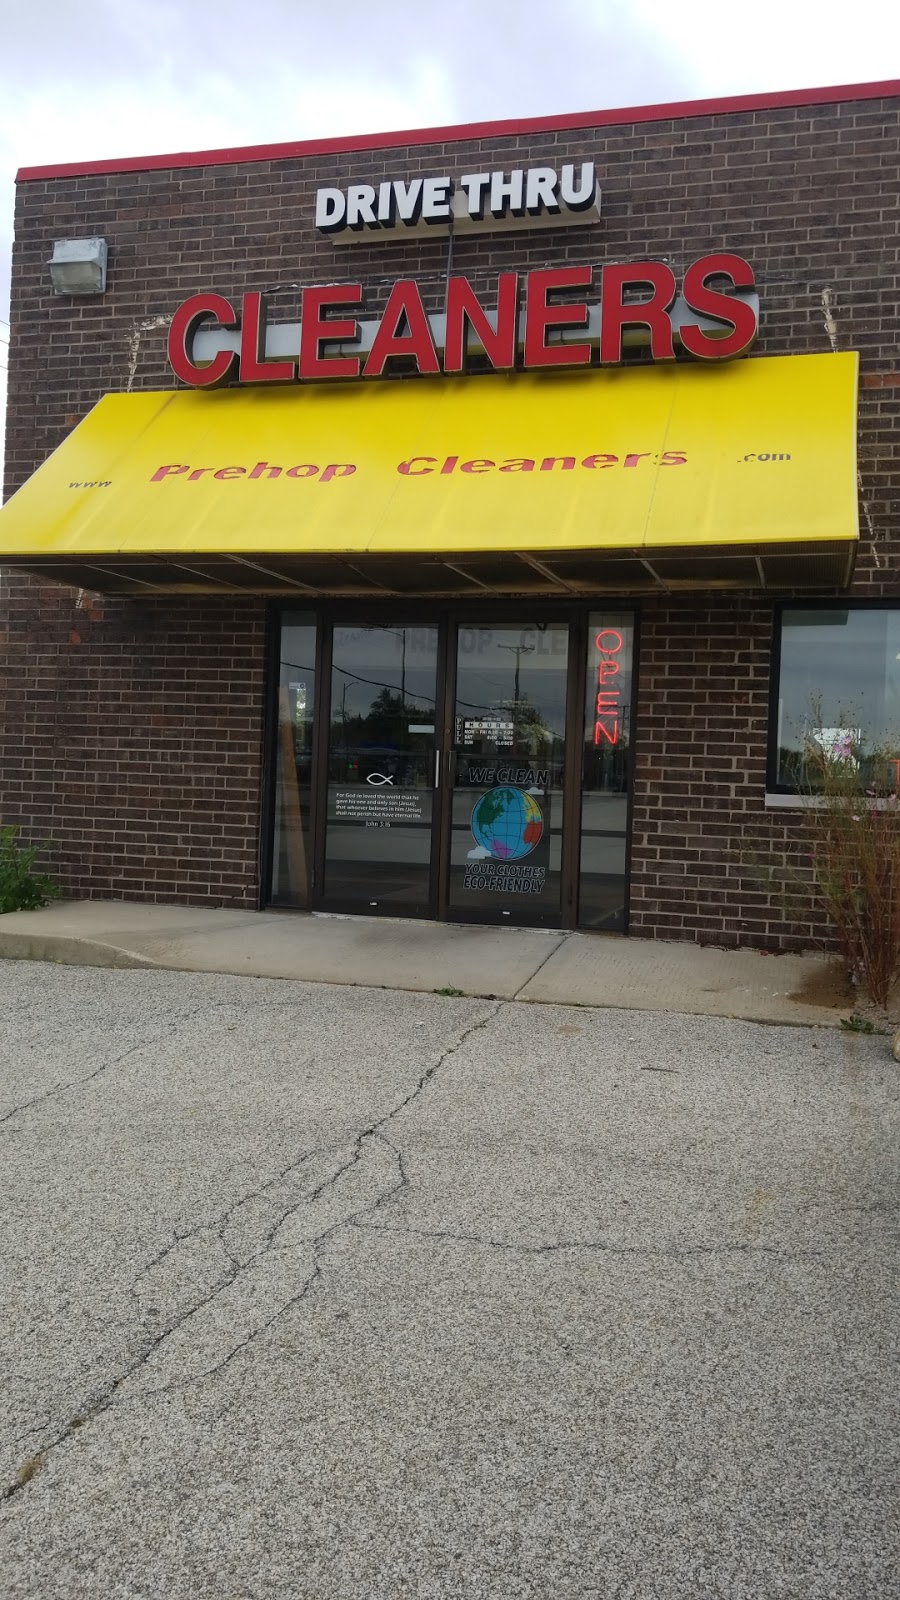 Prehop Cleaners & Shirt Laundry | 1280 Finley Rd, Lombard, IL 60148, USA | Phone: (630) 620-0880